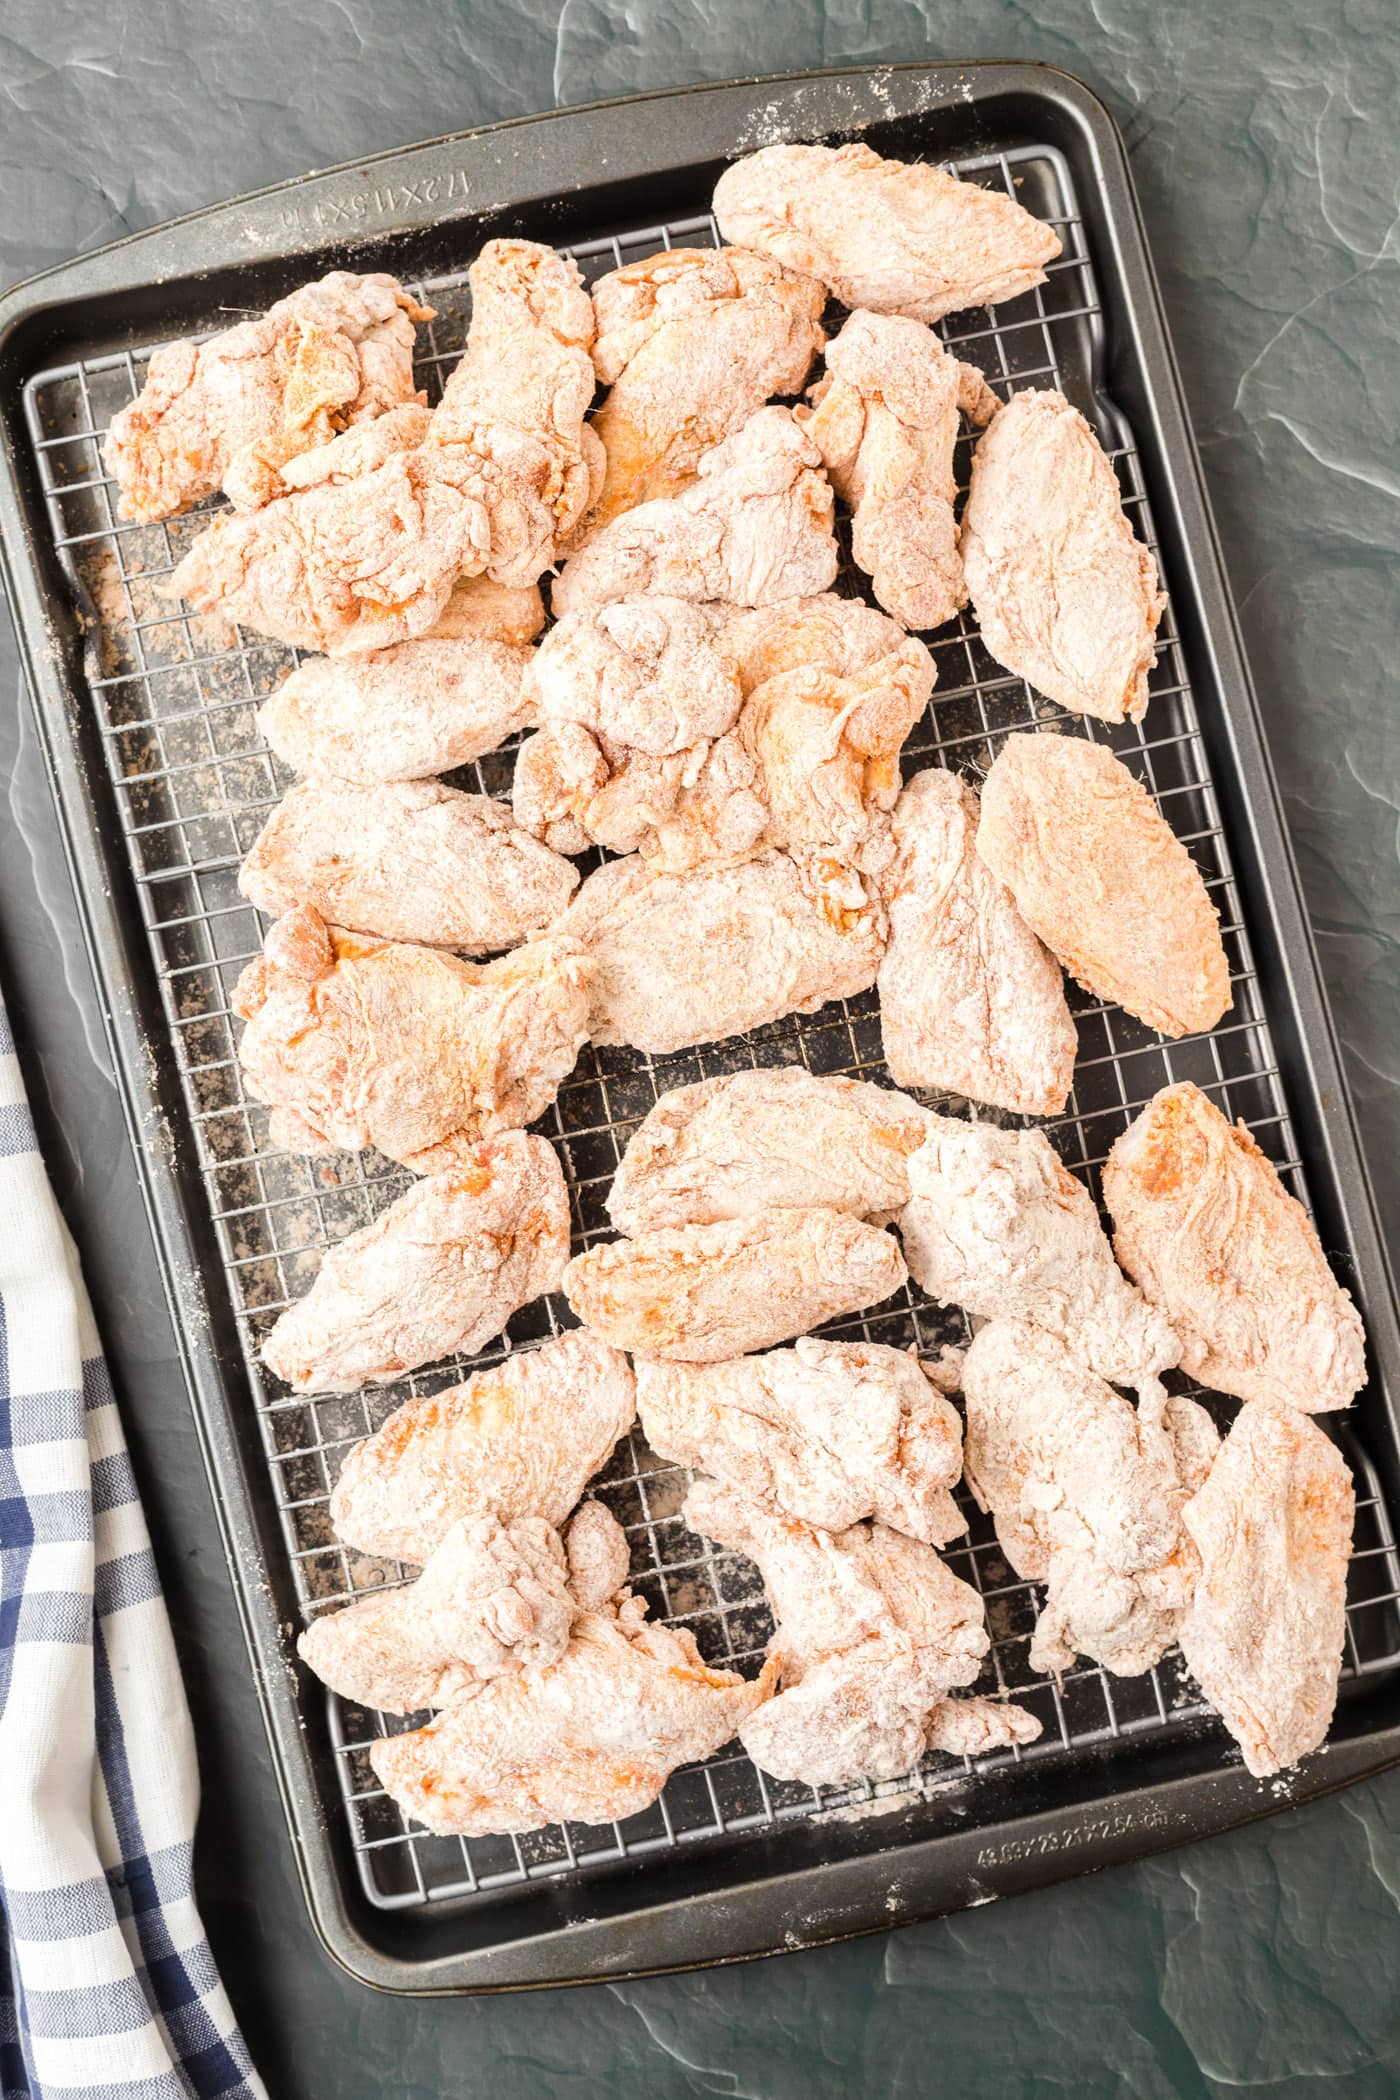 flour dredged chicken wings on a baking sheet